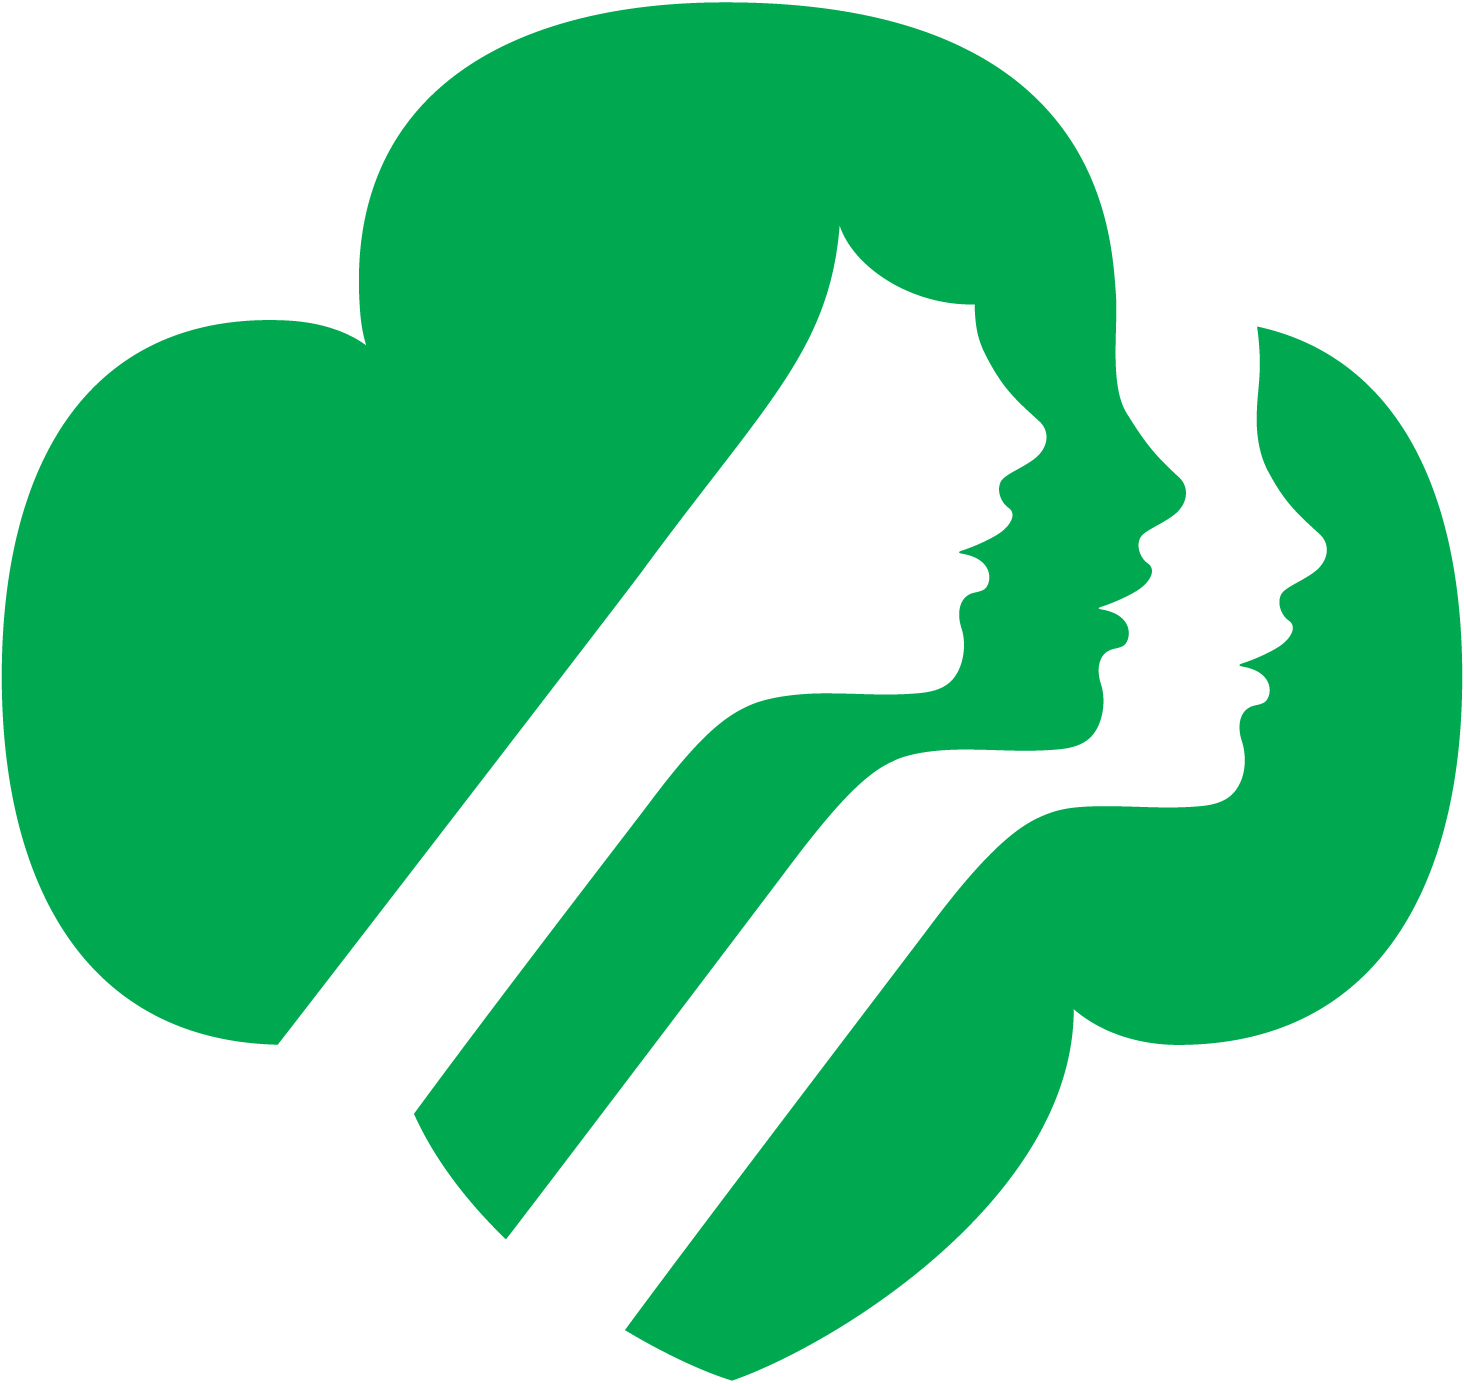 Girl scouts .